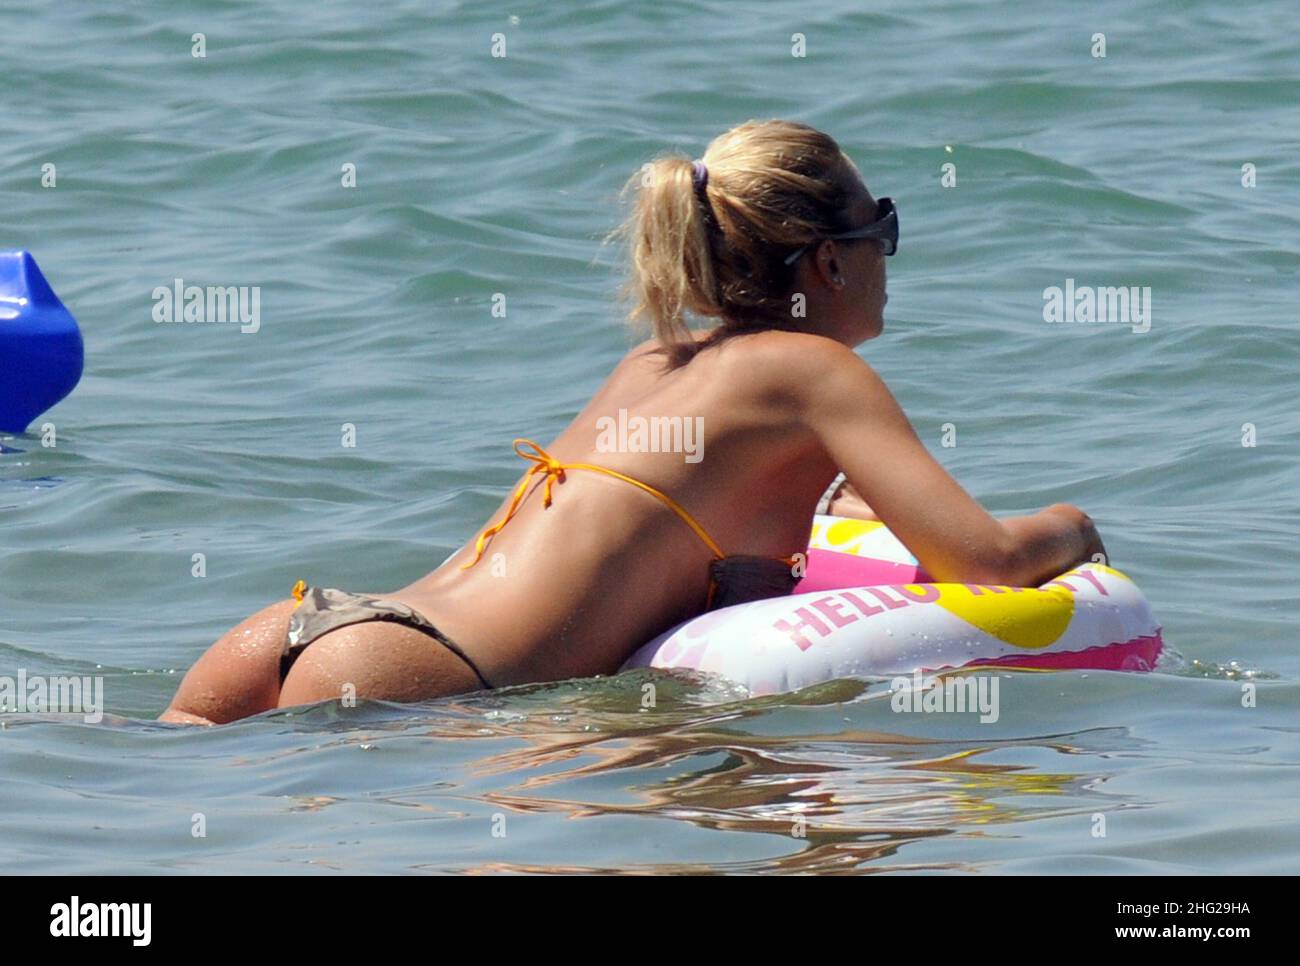 Ilary Blasi, wife of soccer player Francesco Totti, relaxing on the beach in the coastal town Sabaudia in Lazio, Italy. Stock Photo